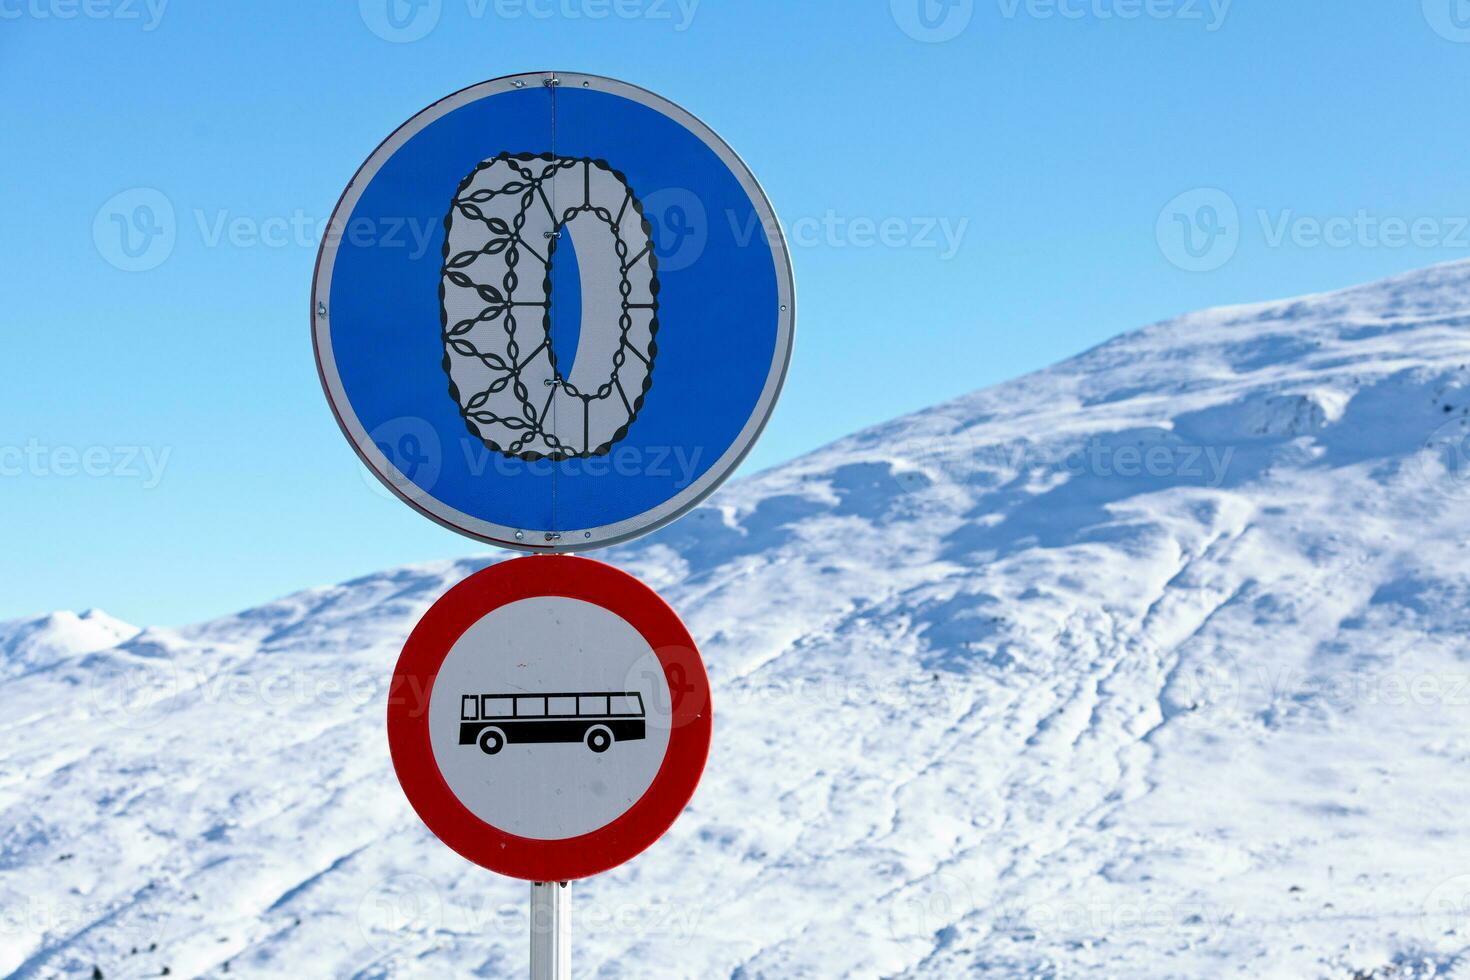 European snow chains and prohibition of buses sign photo